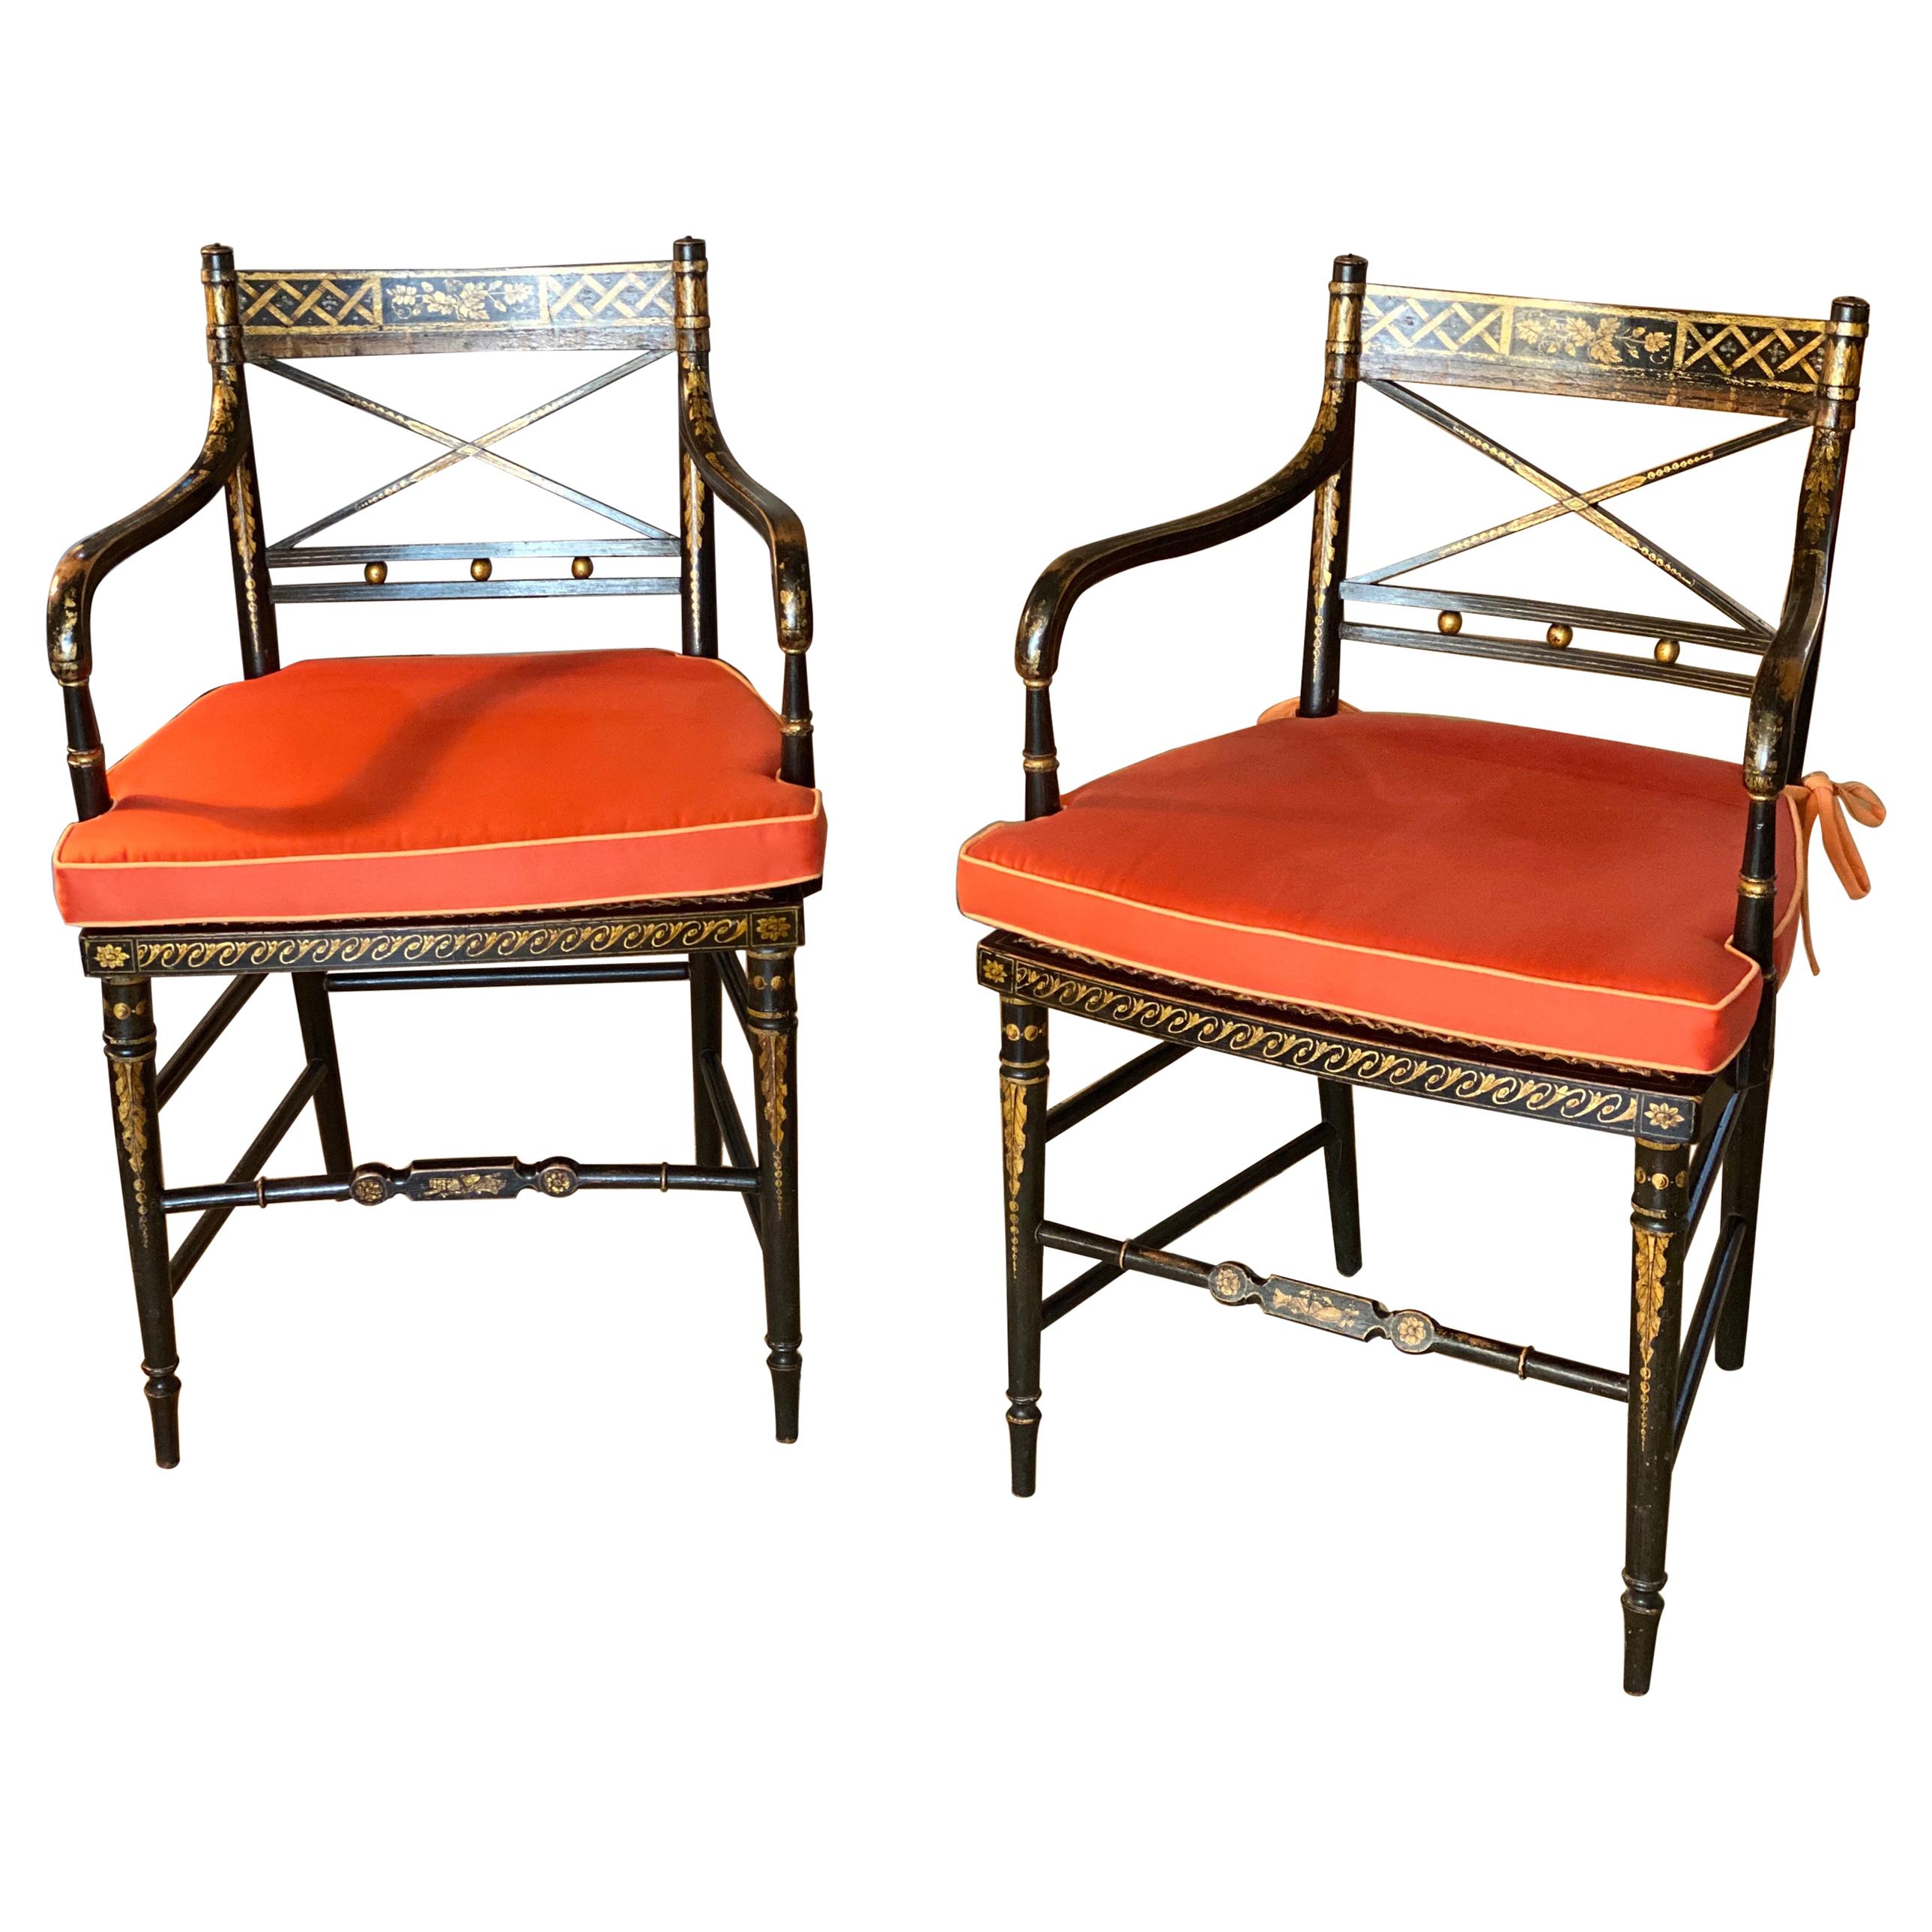 Pair of Regency Parcel-Gilt Rosewood-Grained Caned Armchairs, circa 1810